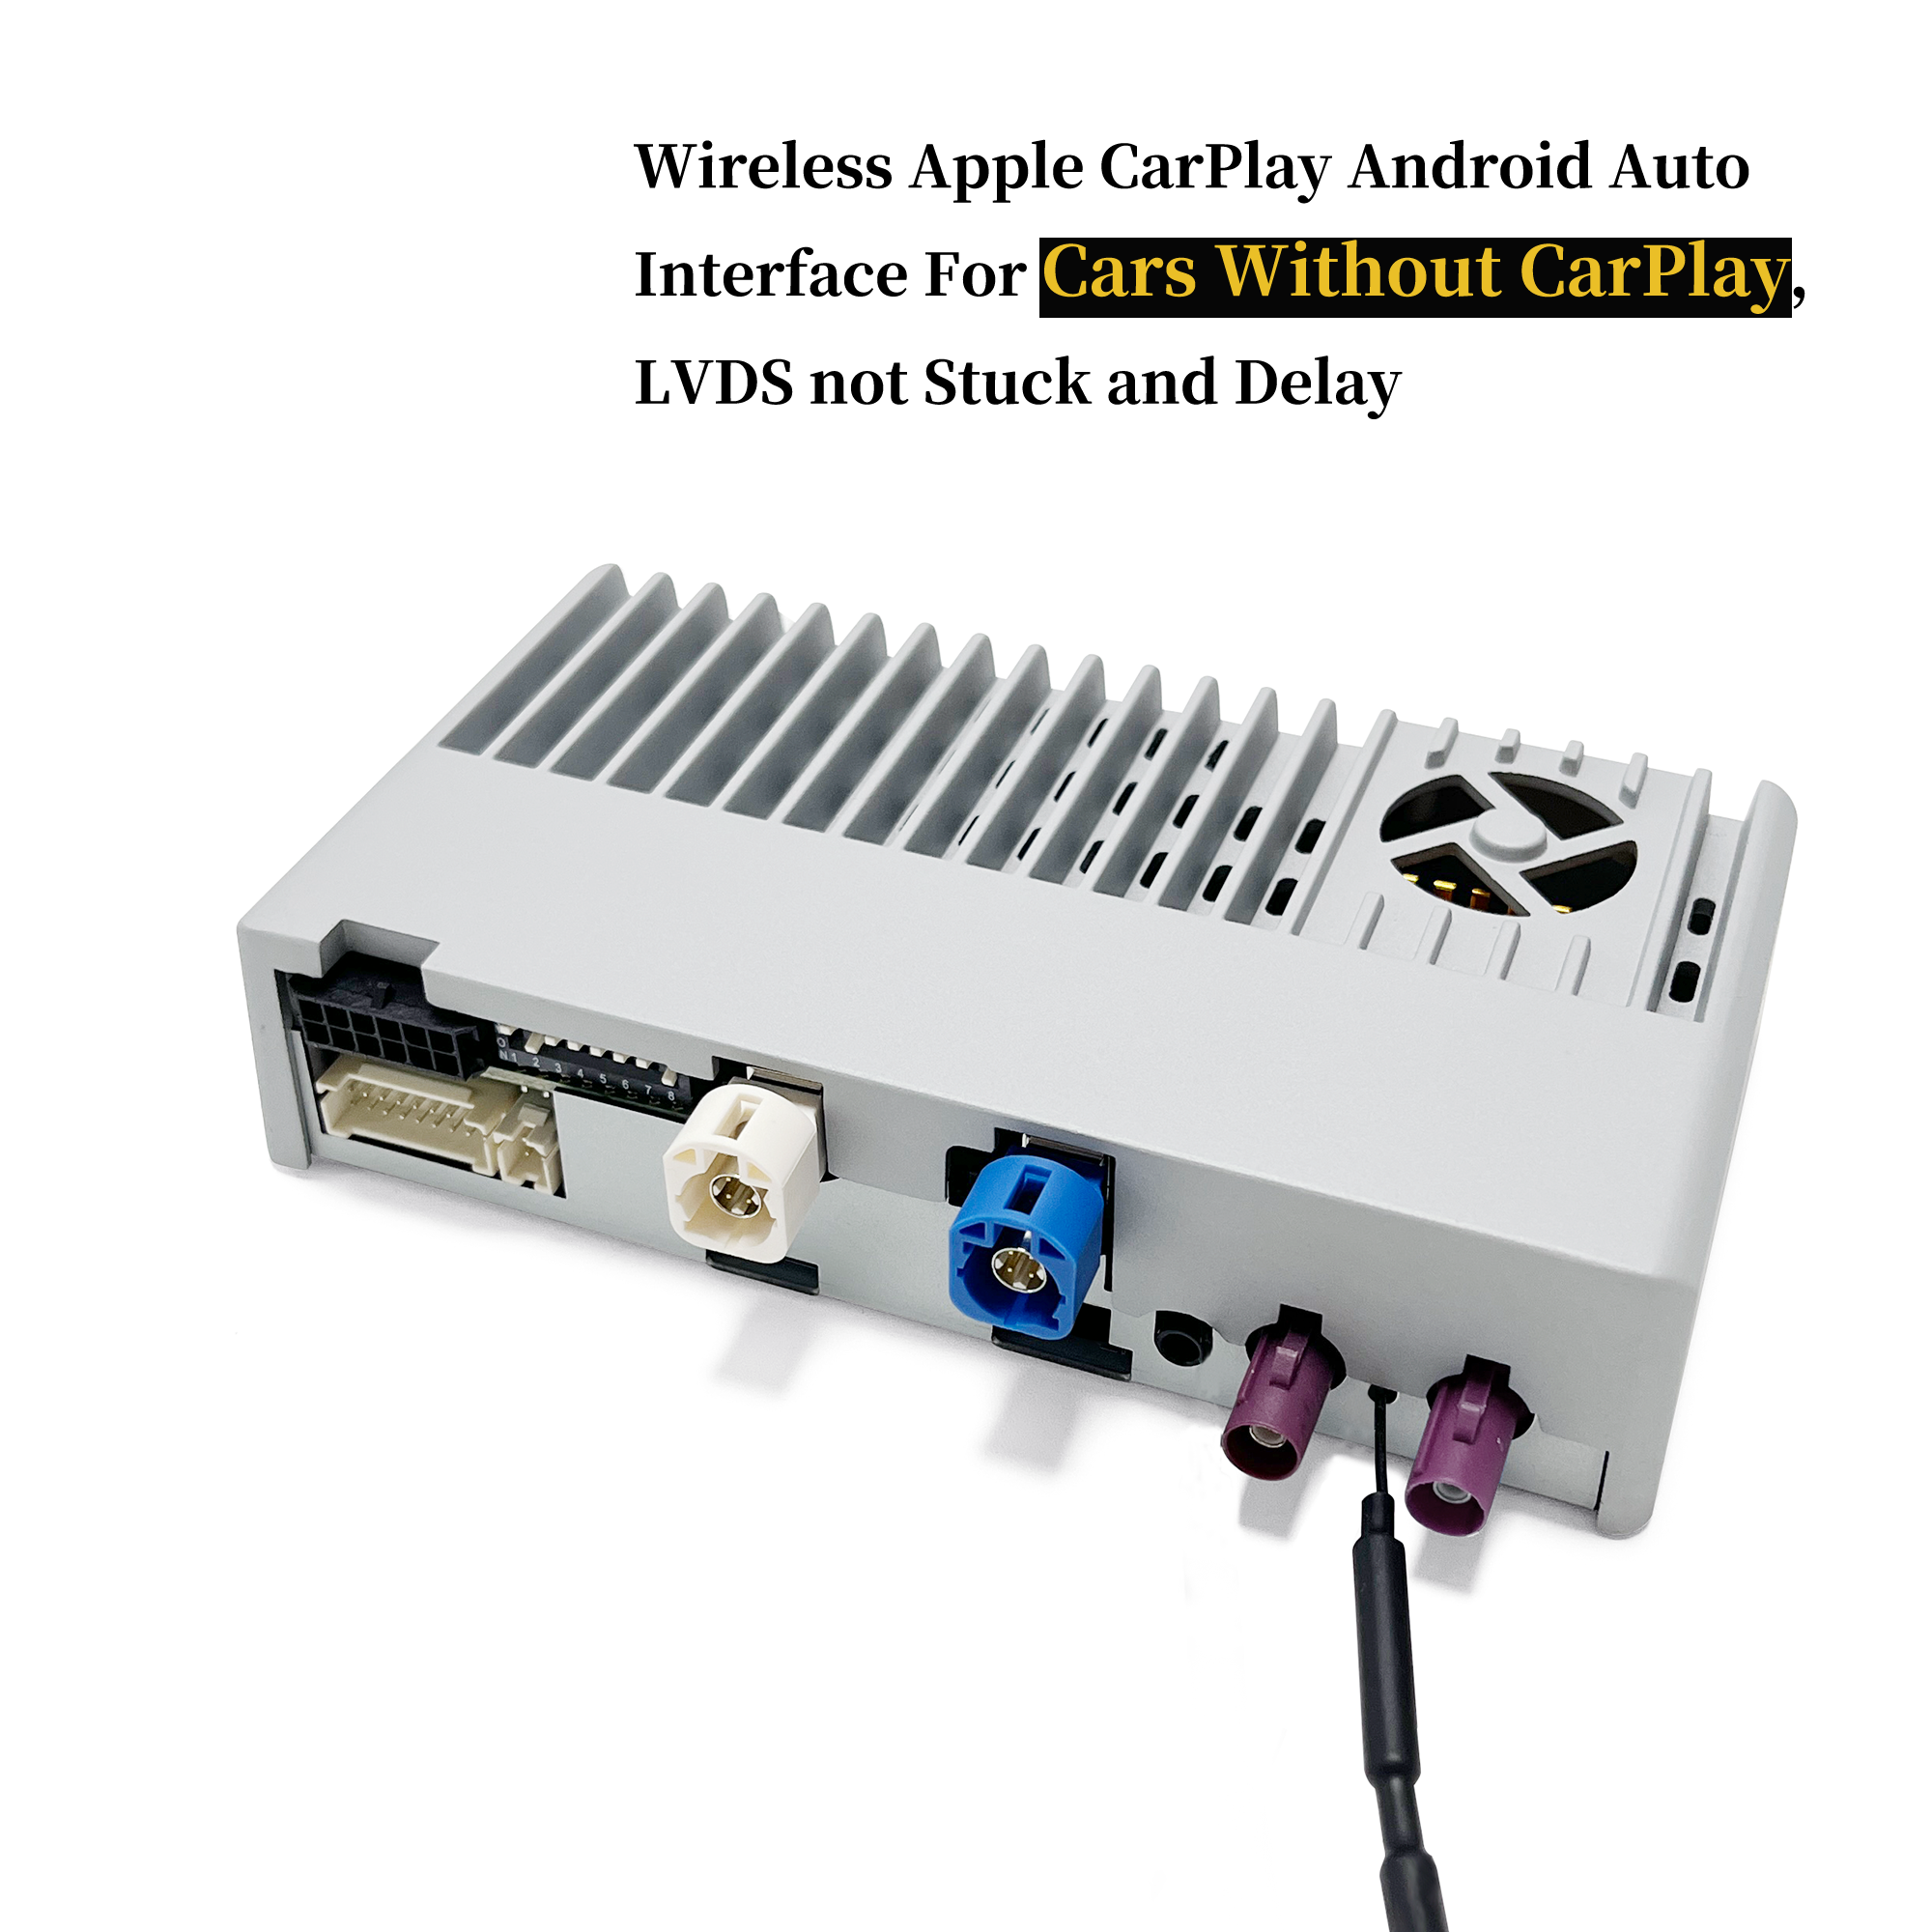 CarPlay Box For Volvo V60 9 inch Touch Sreen Android Auto Wireless Wi-Fi LVDS Interface Is for Special Car, Compatible Car With Or Without OEM Wired CarPlay